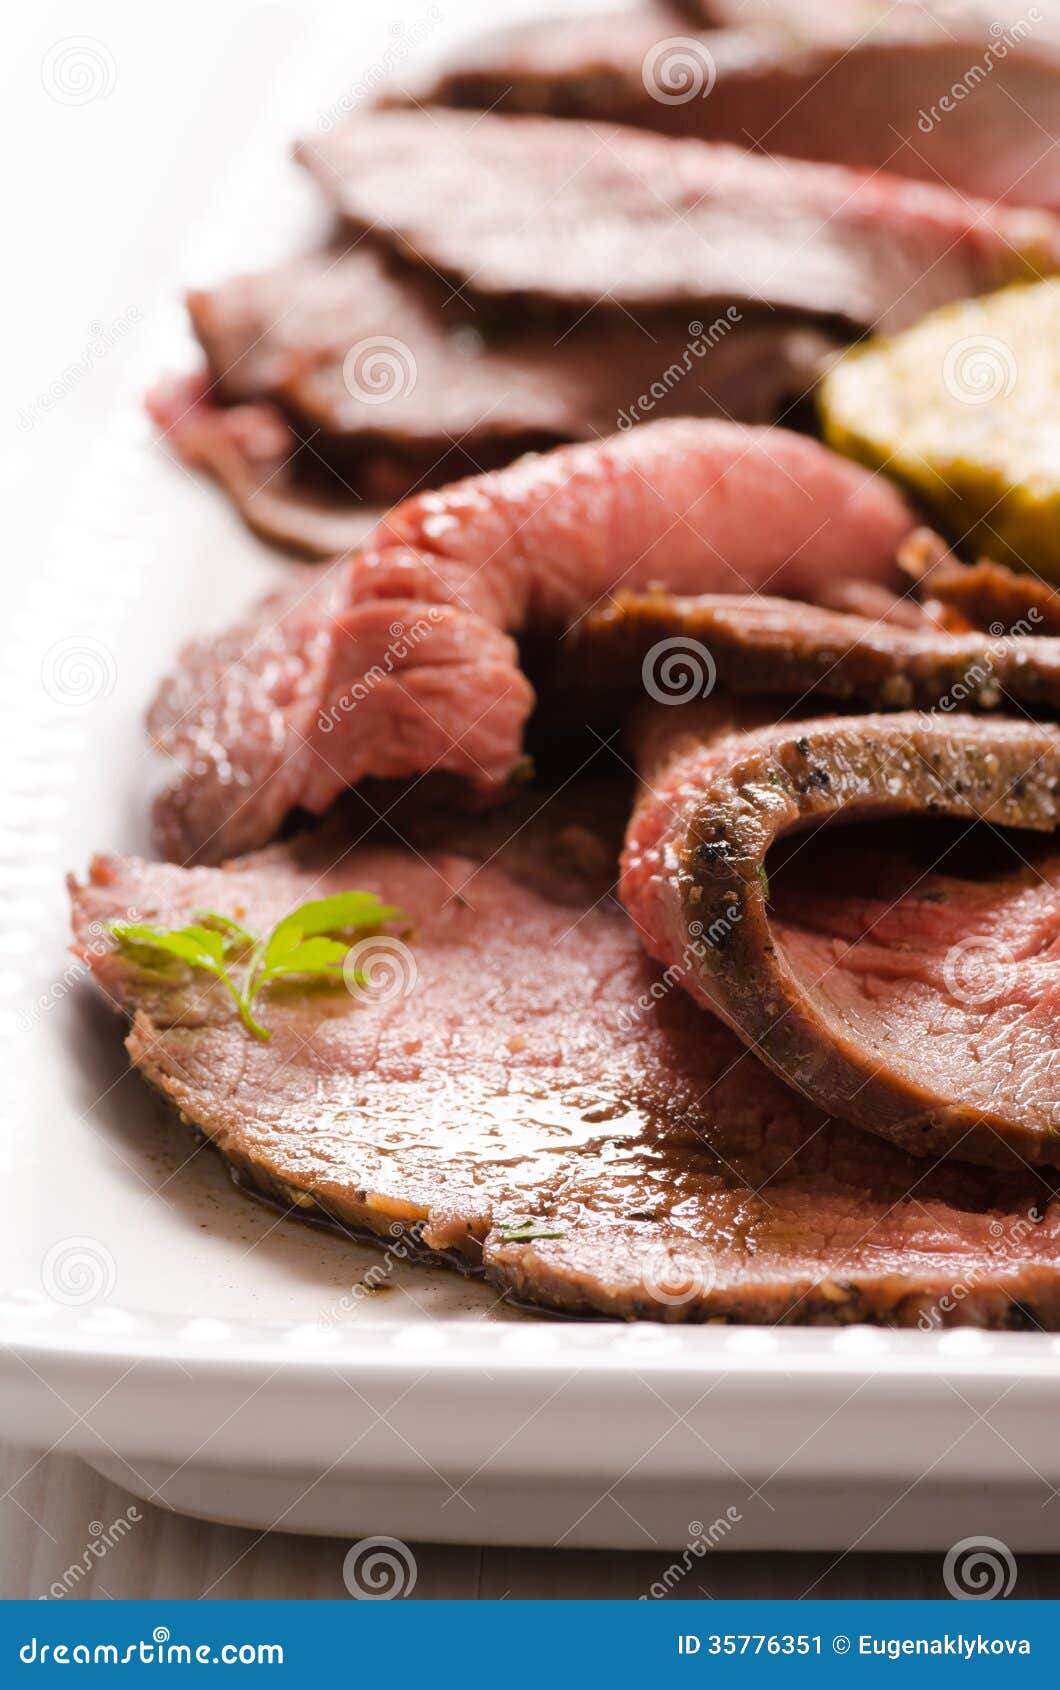 Slices of roast beef on serving plate. Slices of roastbeef on serving plate. Selective focus.